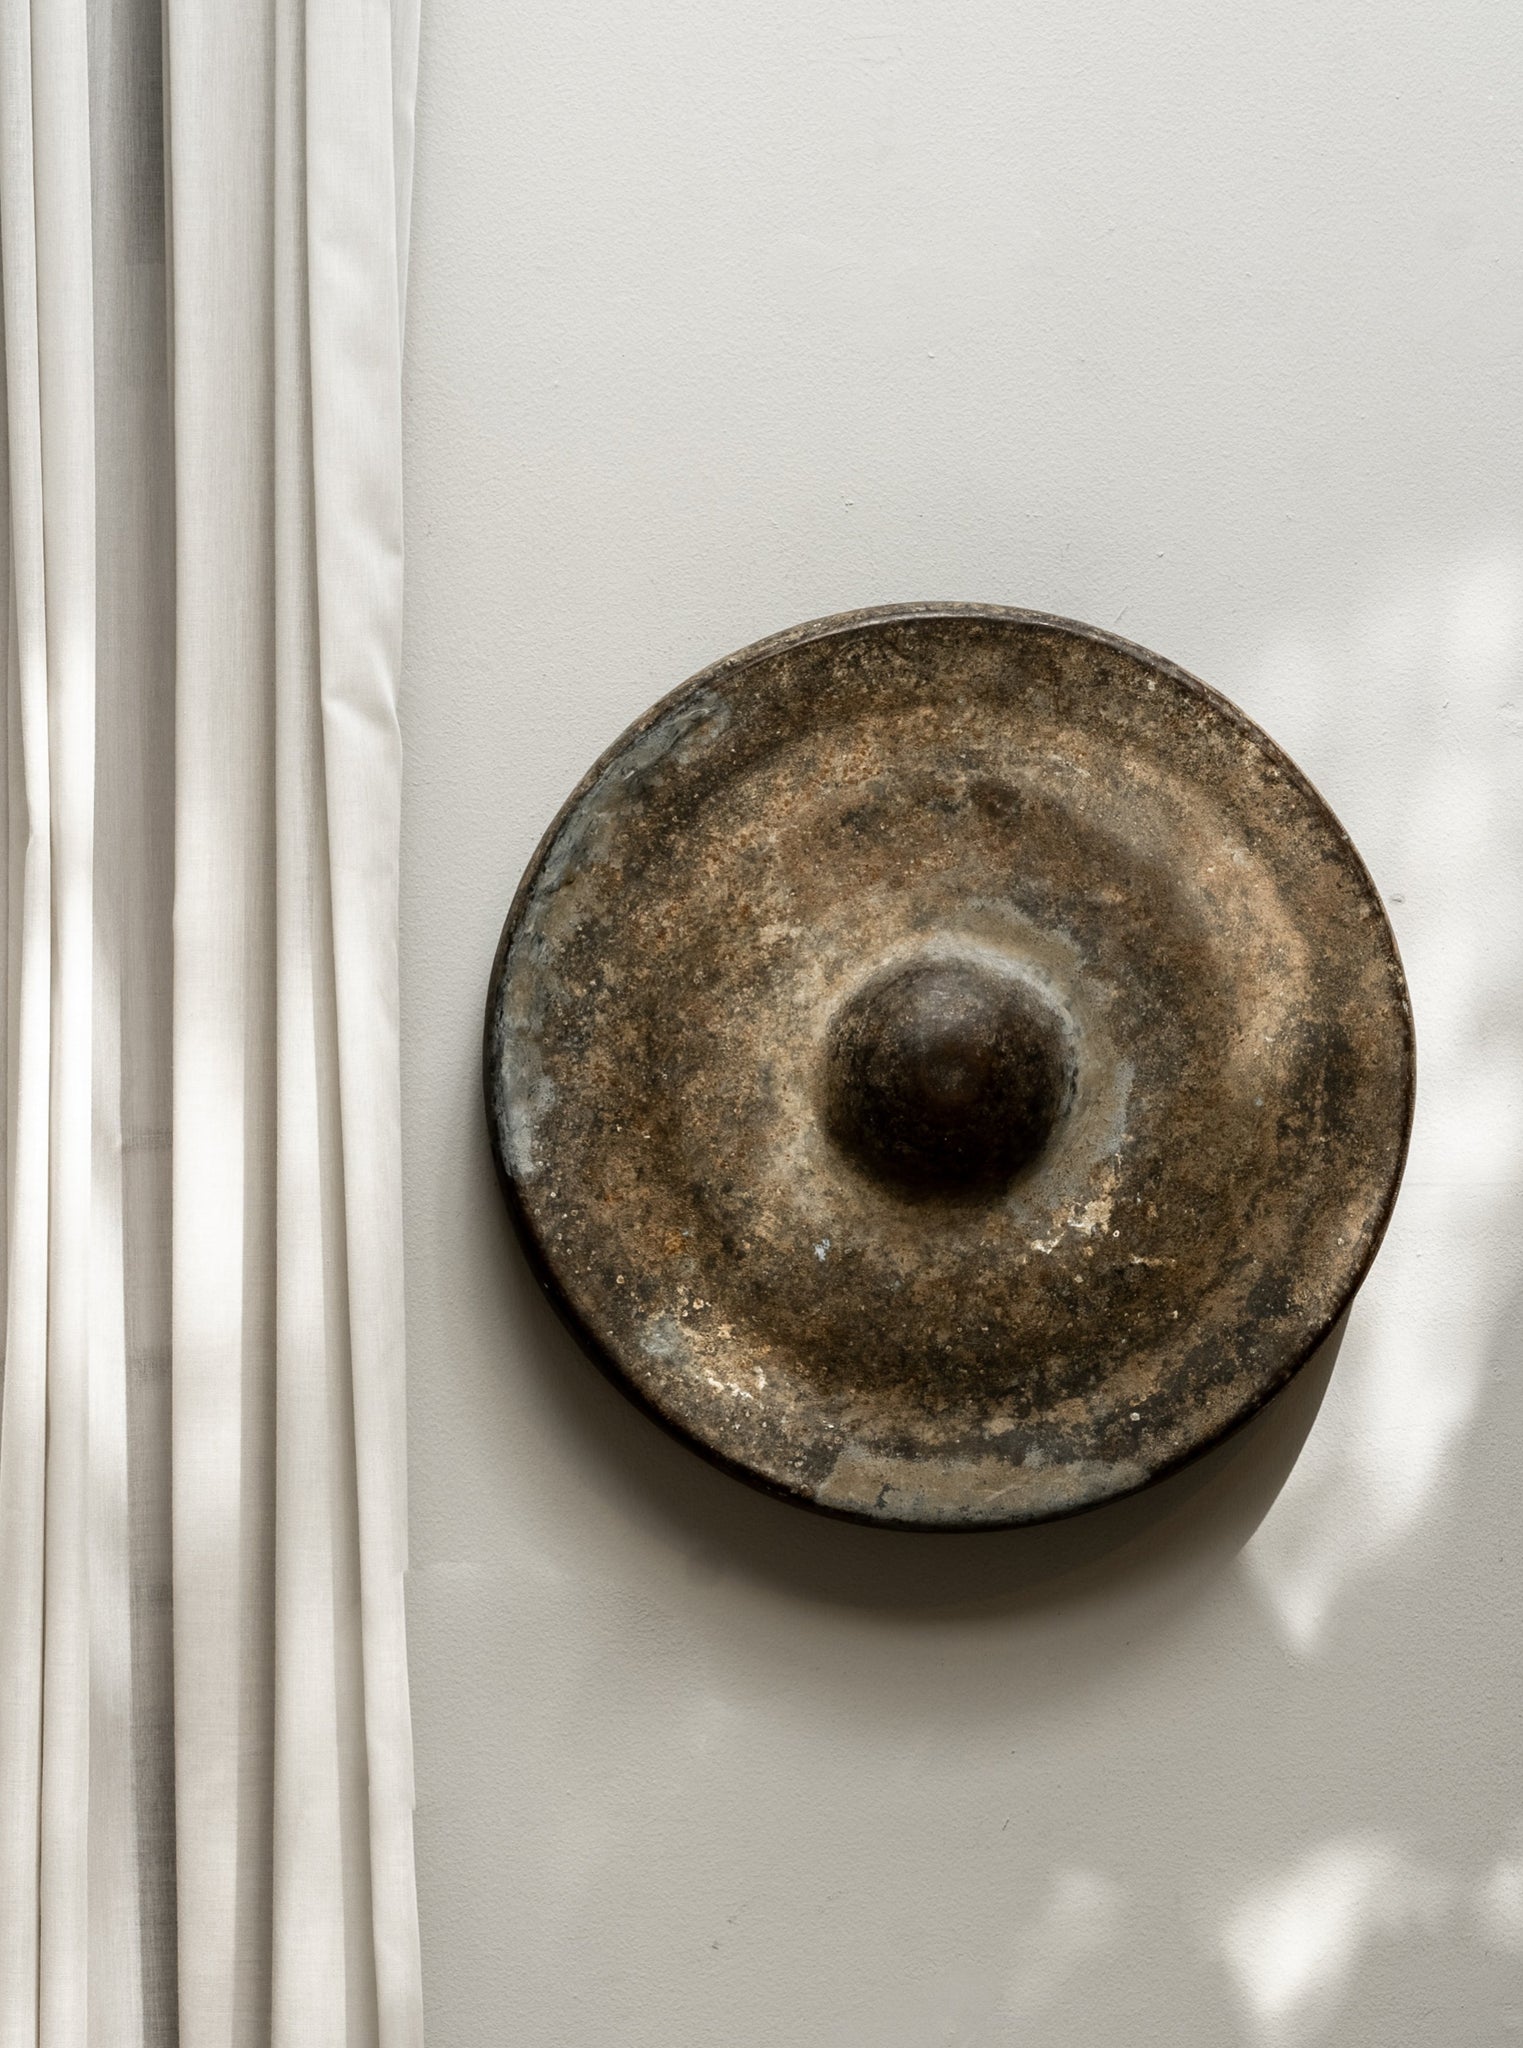 Antique Gong - Sulawesi 1700's